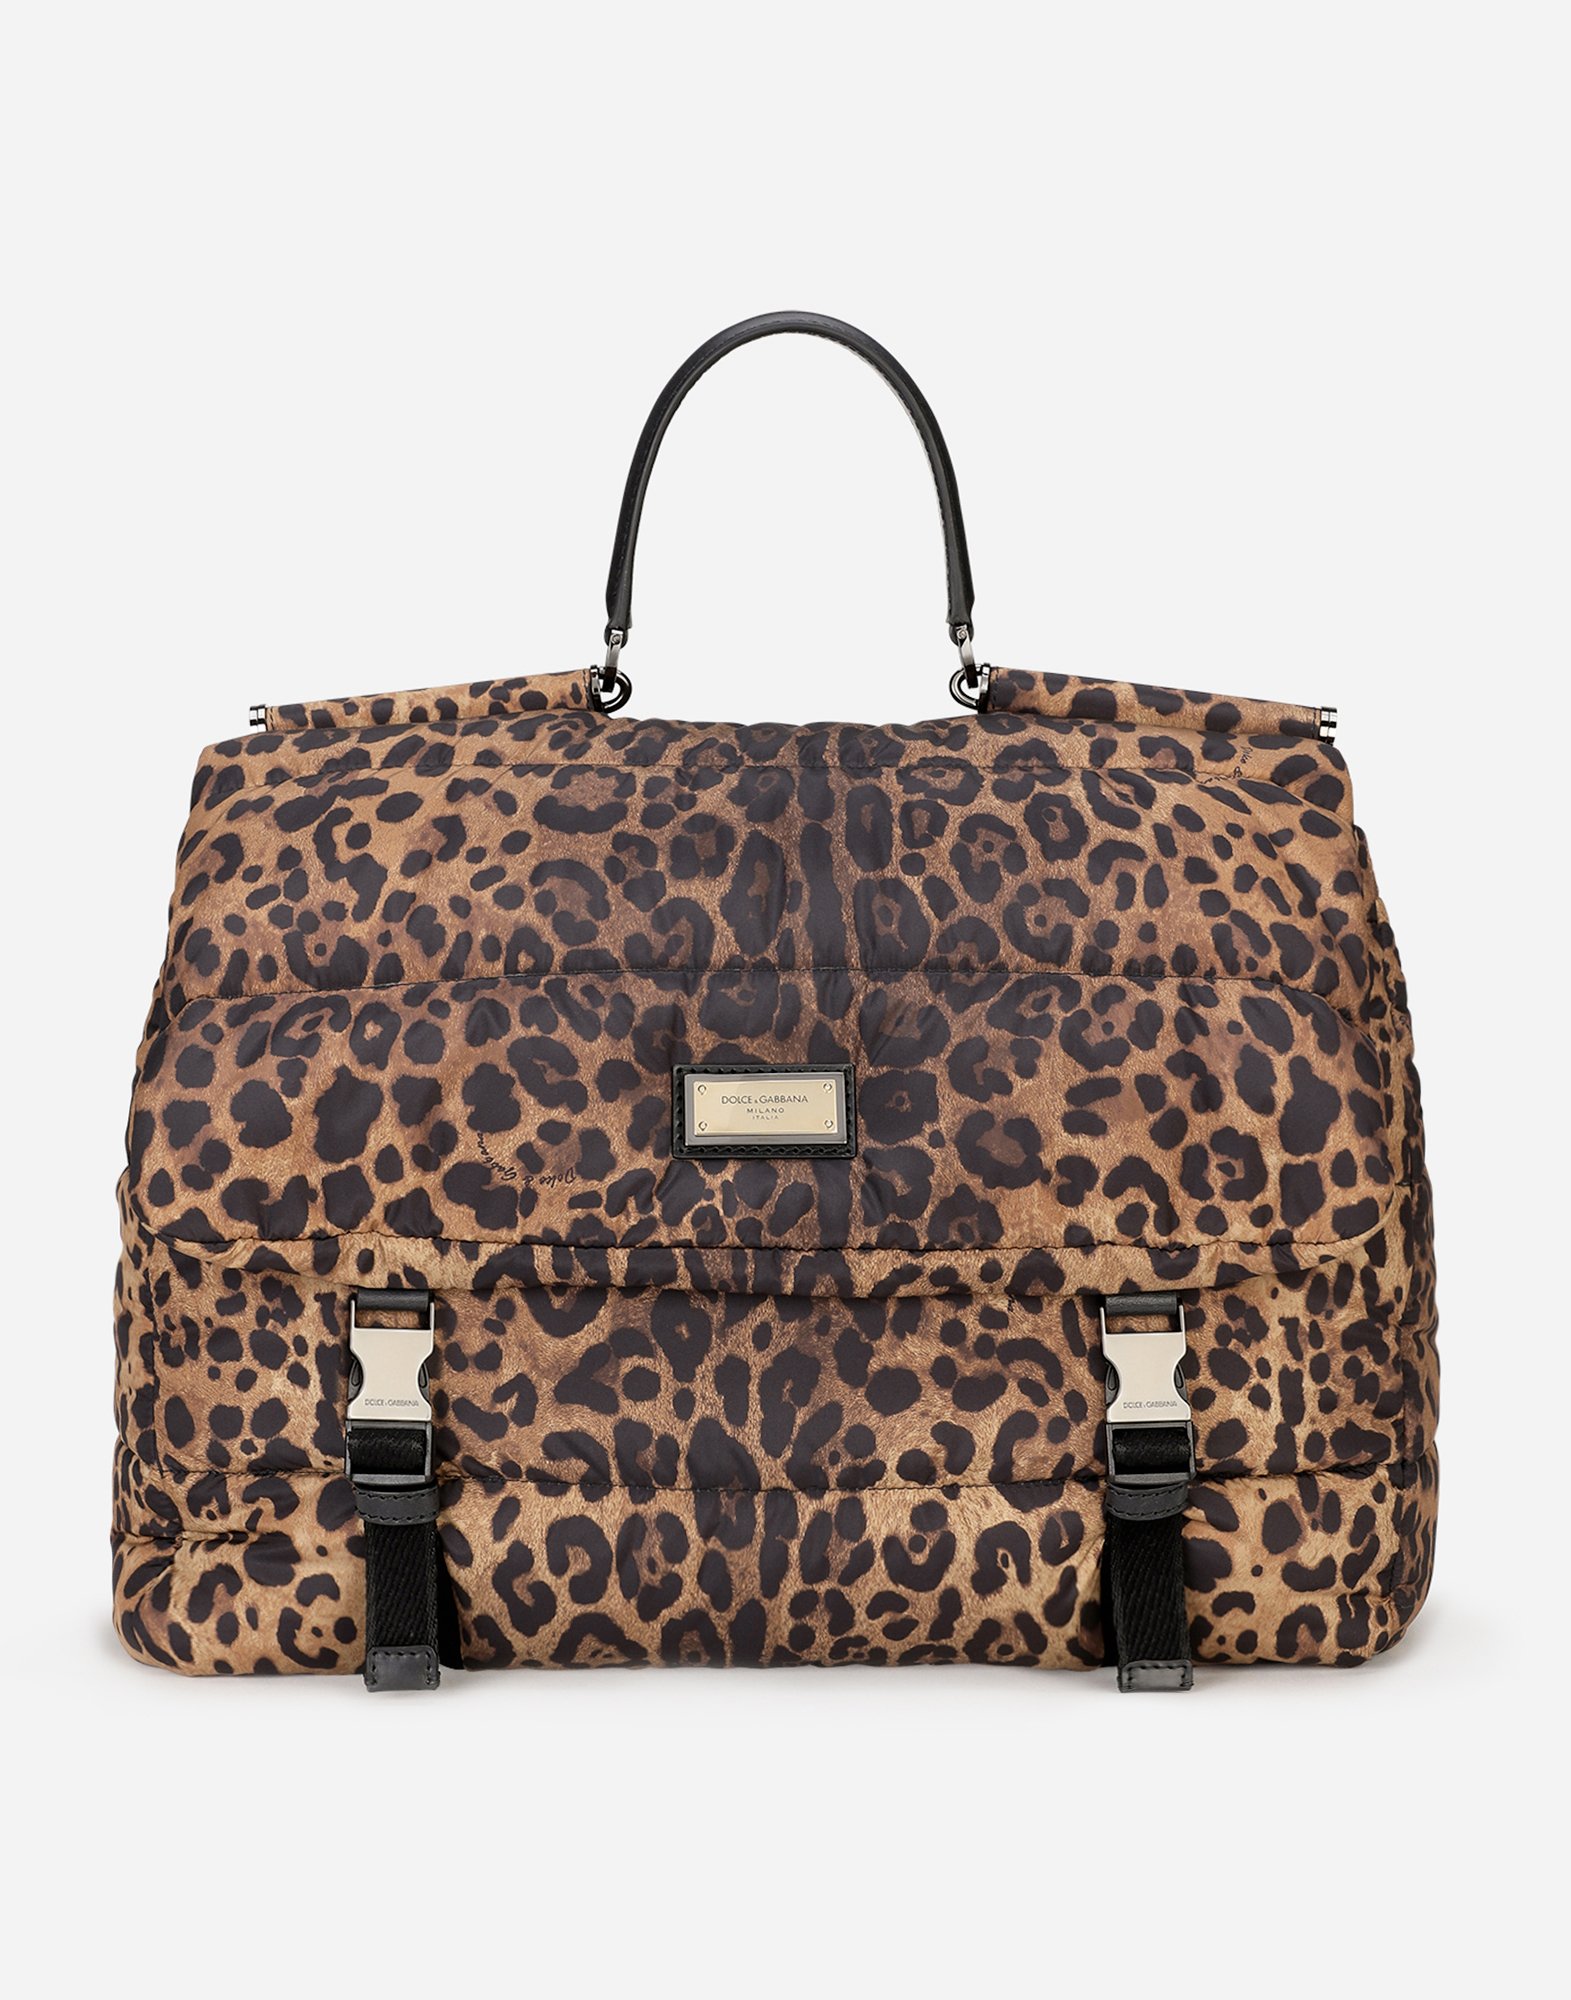 Leopard-print Sicily travel bag in quilted nylon in Leo Print